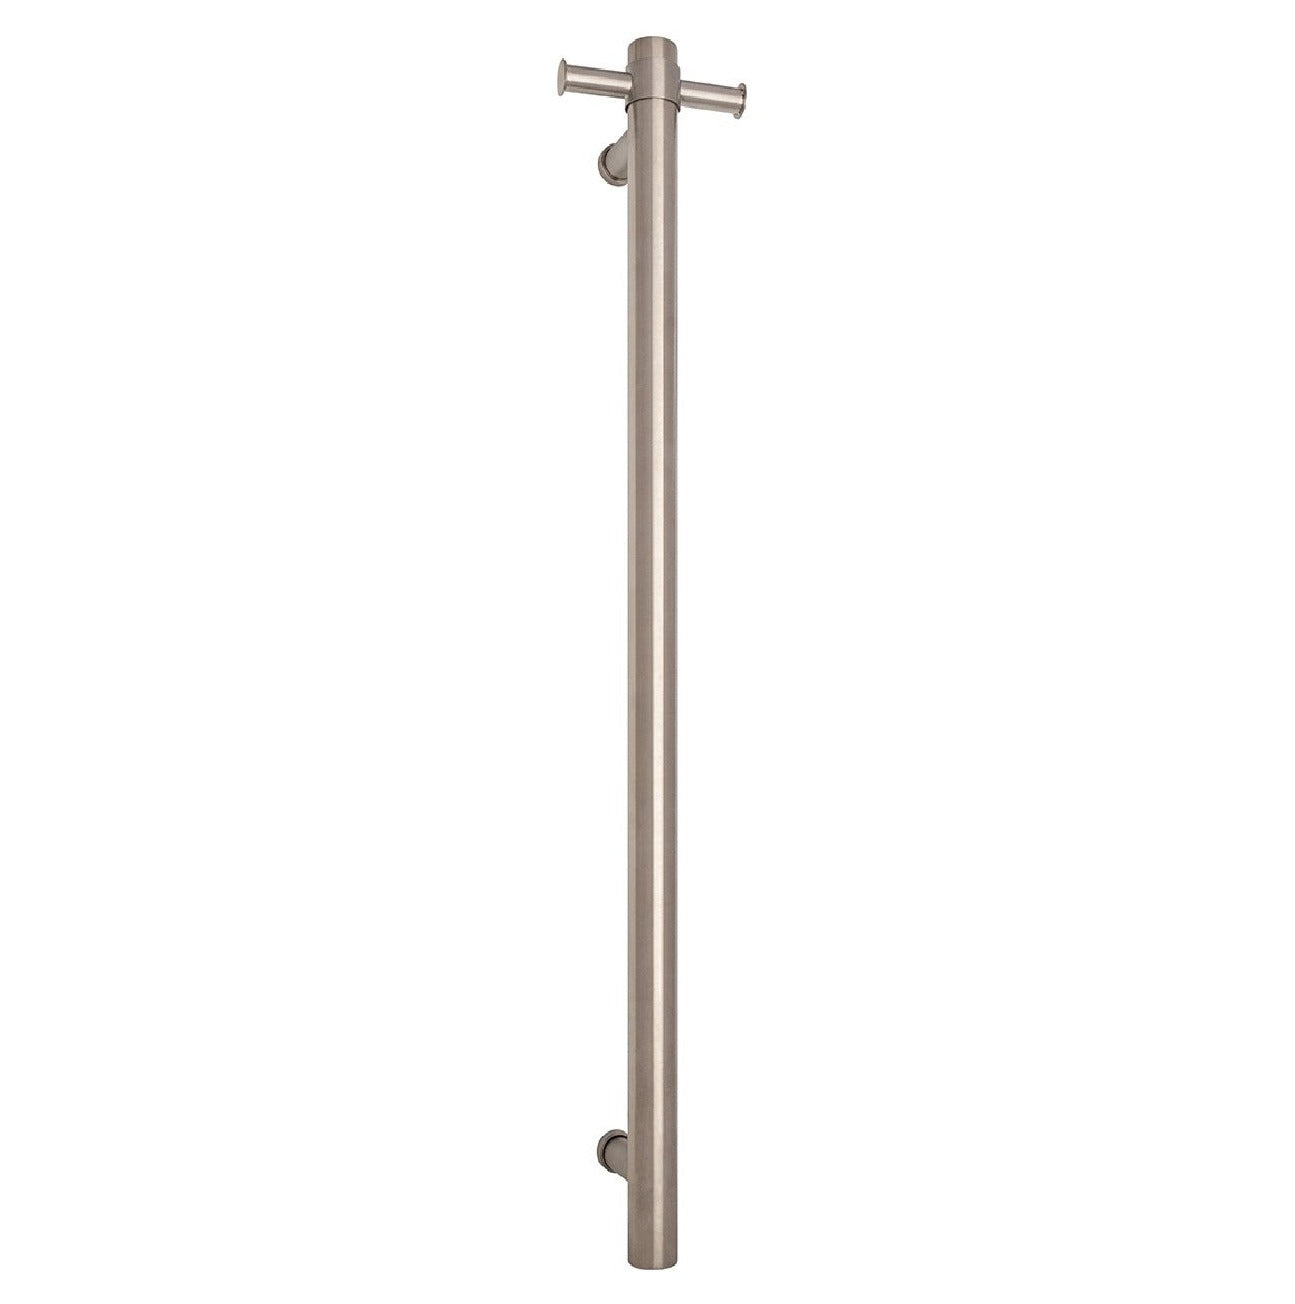 THERMOGROUP BRUSHED STAINLESS STEEL ROUND VERTICAL SINGLE HEATED TOWEL RAIL 900MM